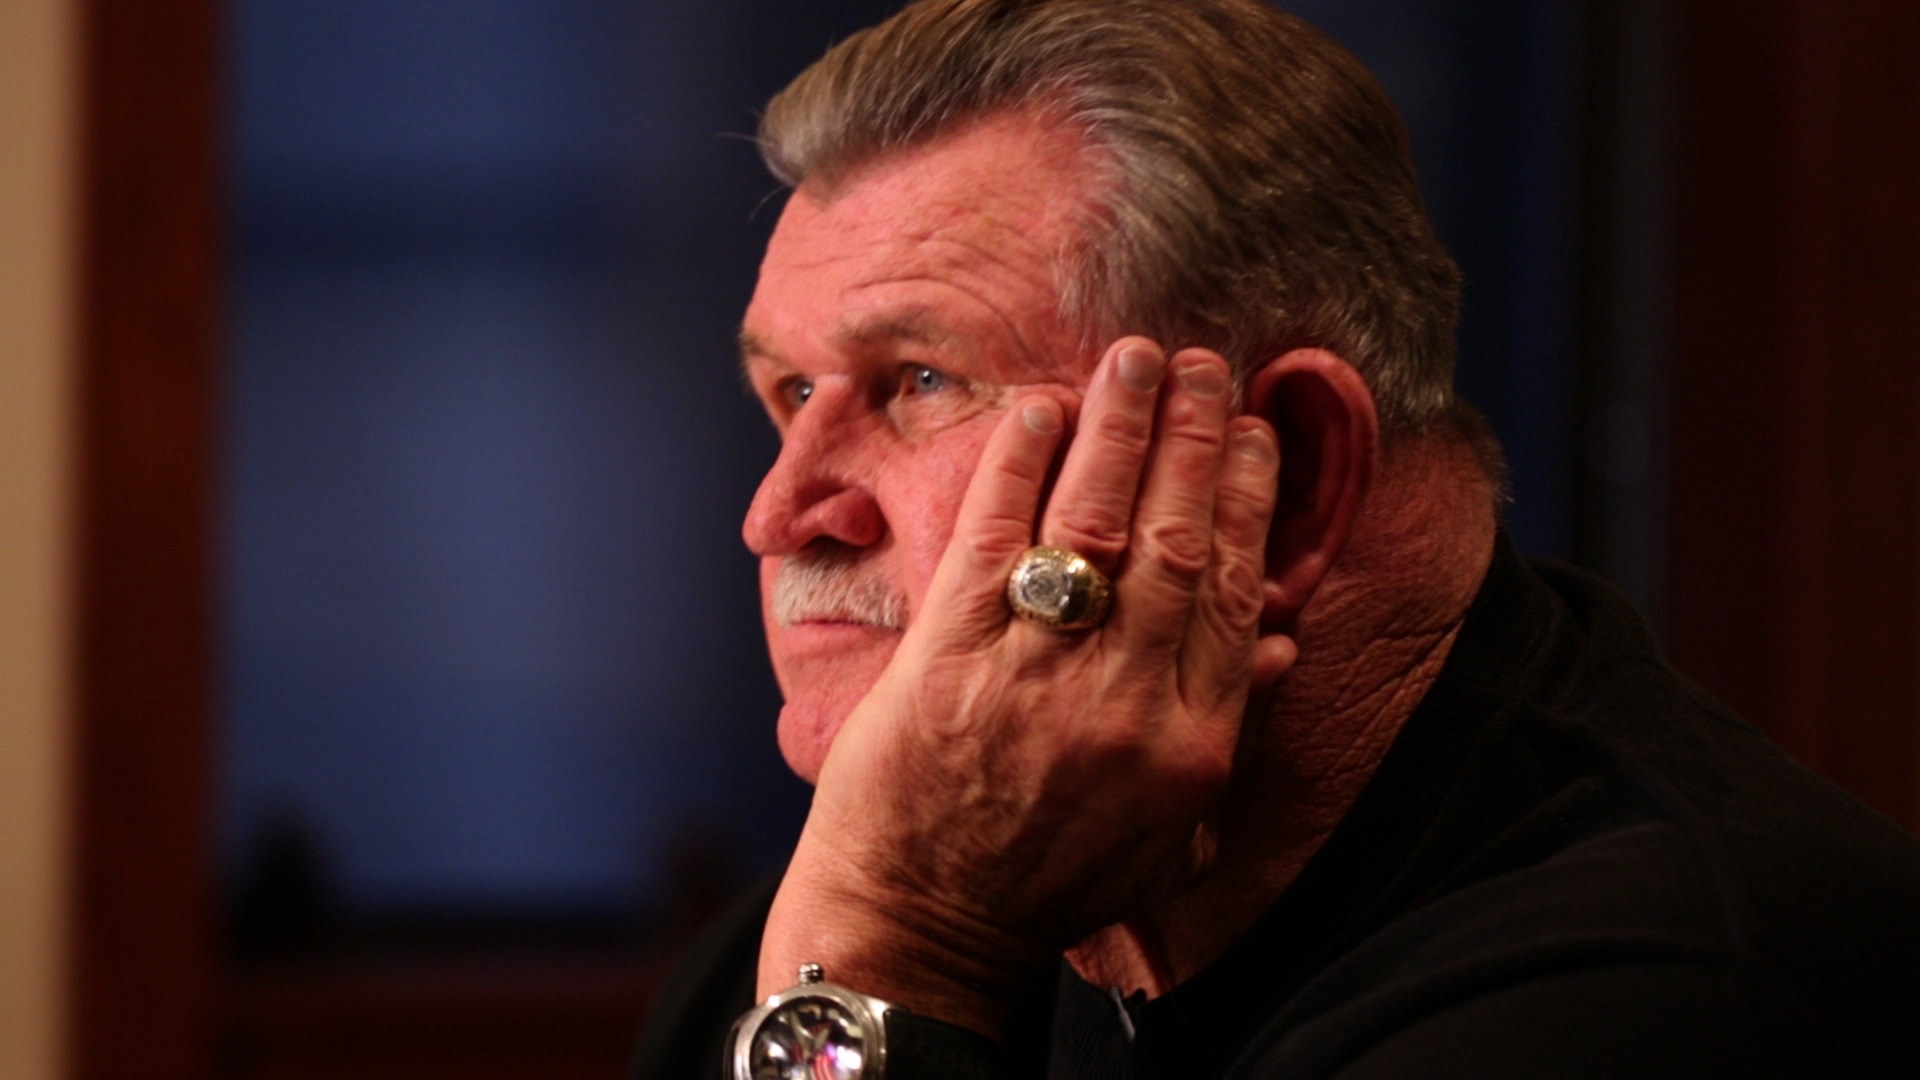  Mike Ditka, former NFL player, coach, and television commentator (November 2012) 